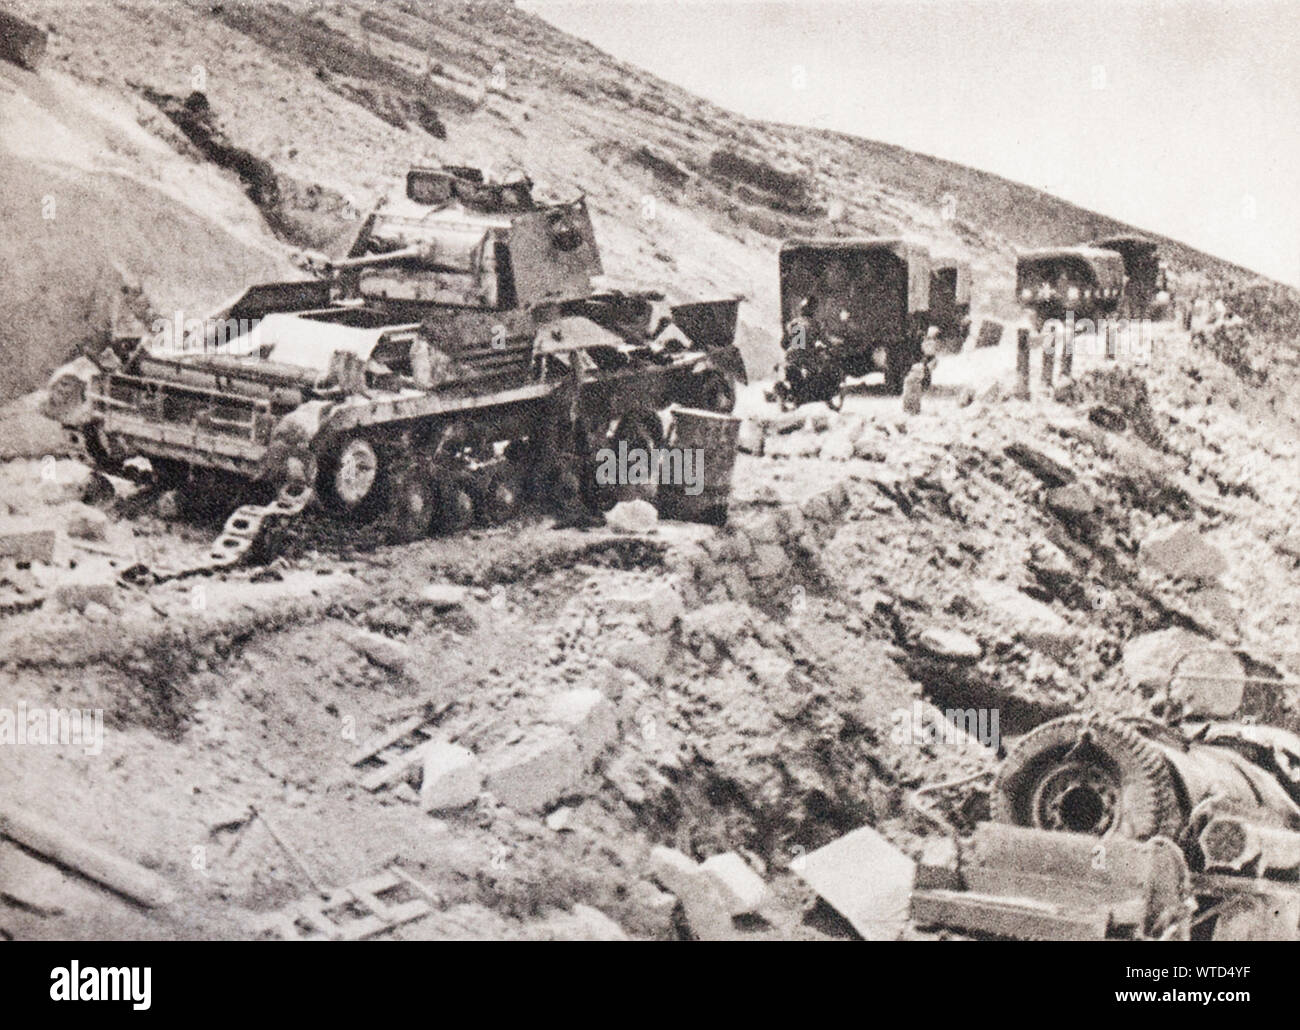 WWII period. Fighting in Cyrenaica. The successive advances and retreats of the opponents let the roads strewn with destroyed material. Stock Photo